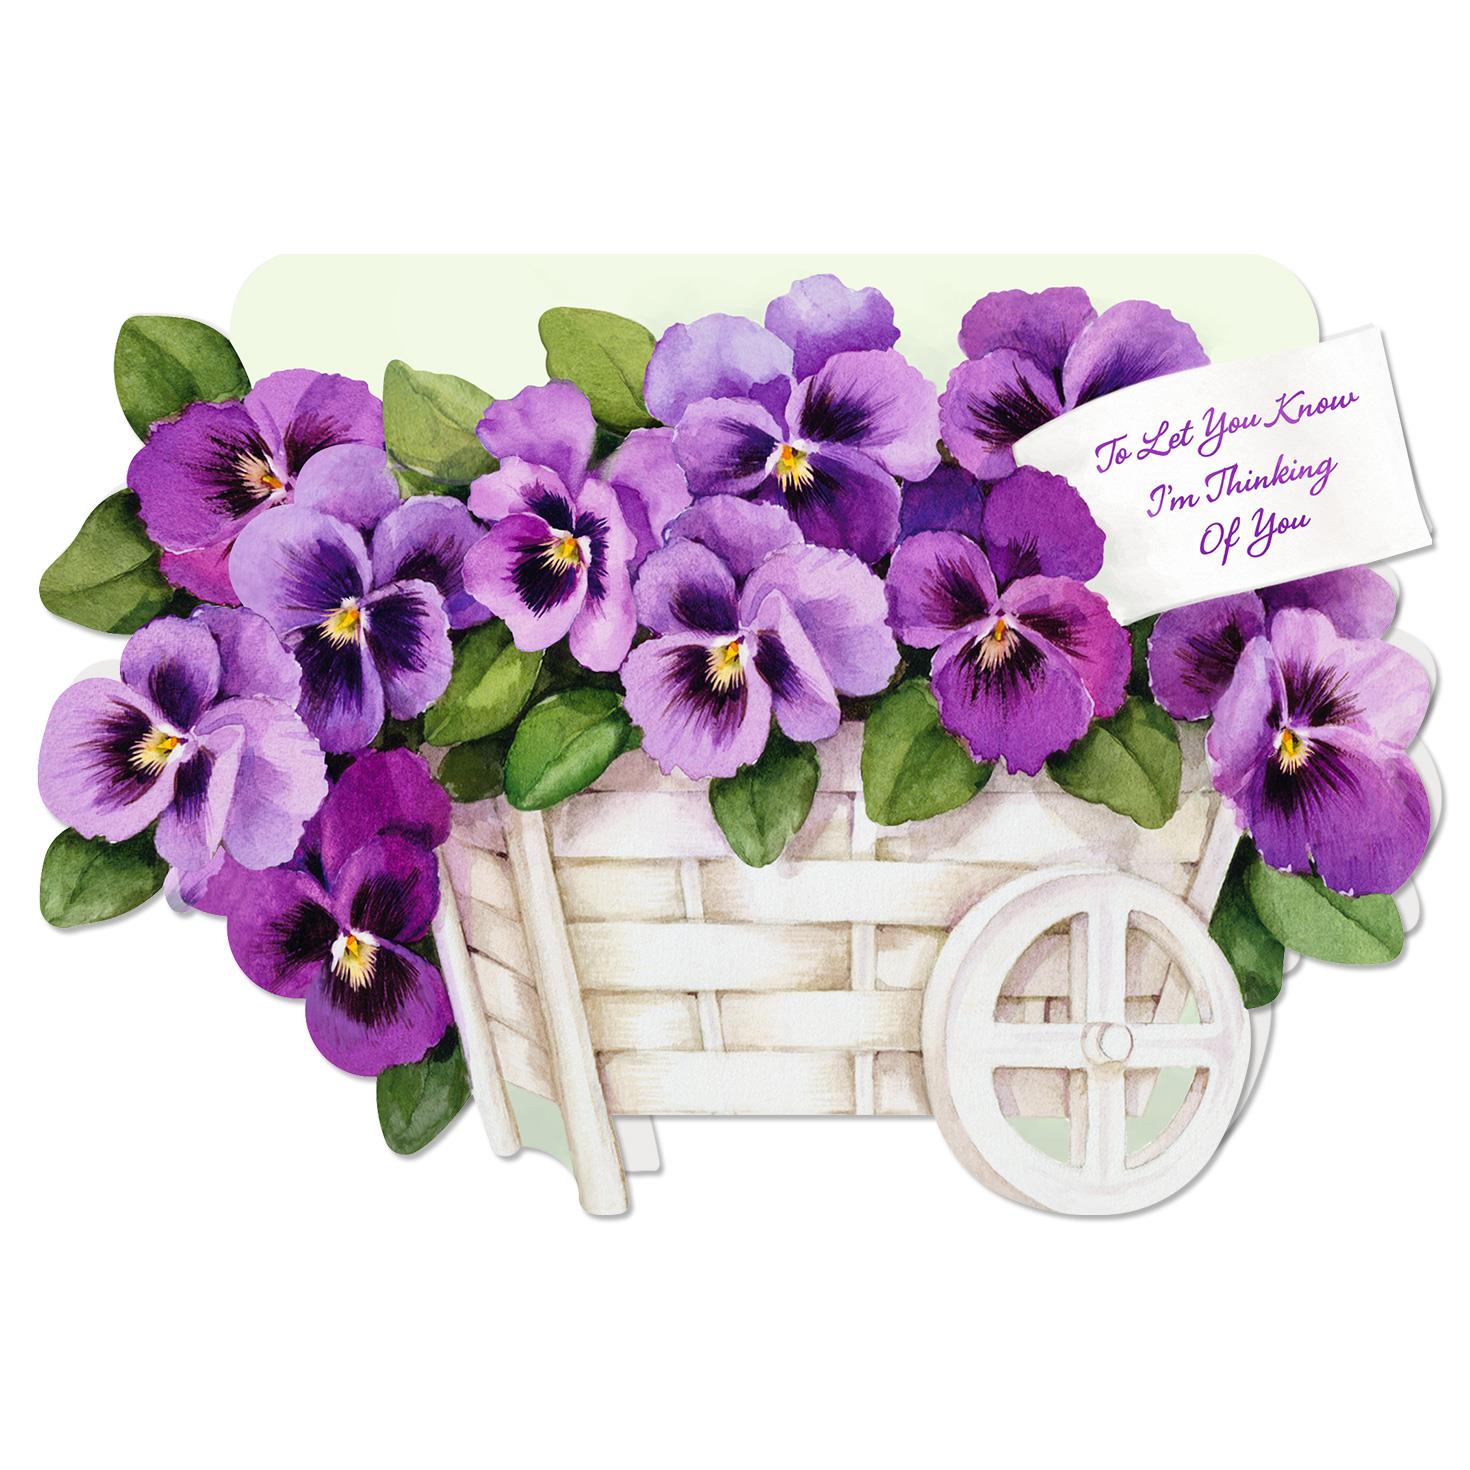 Pansy Thinking of You Card - Greeting Cards - Hallmark